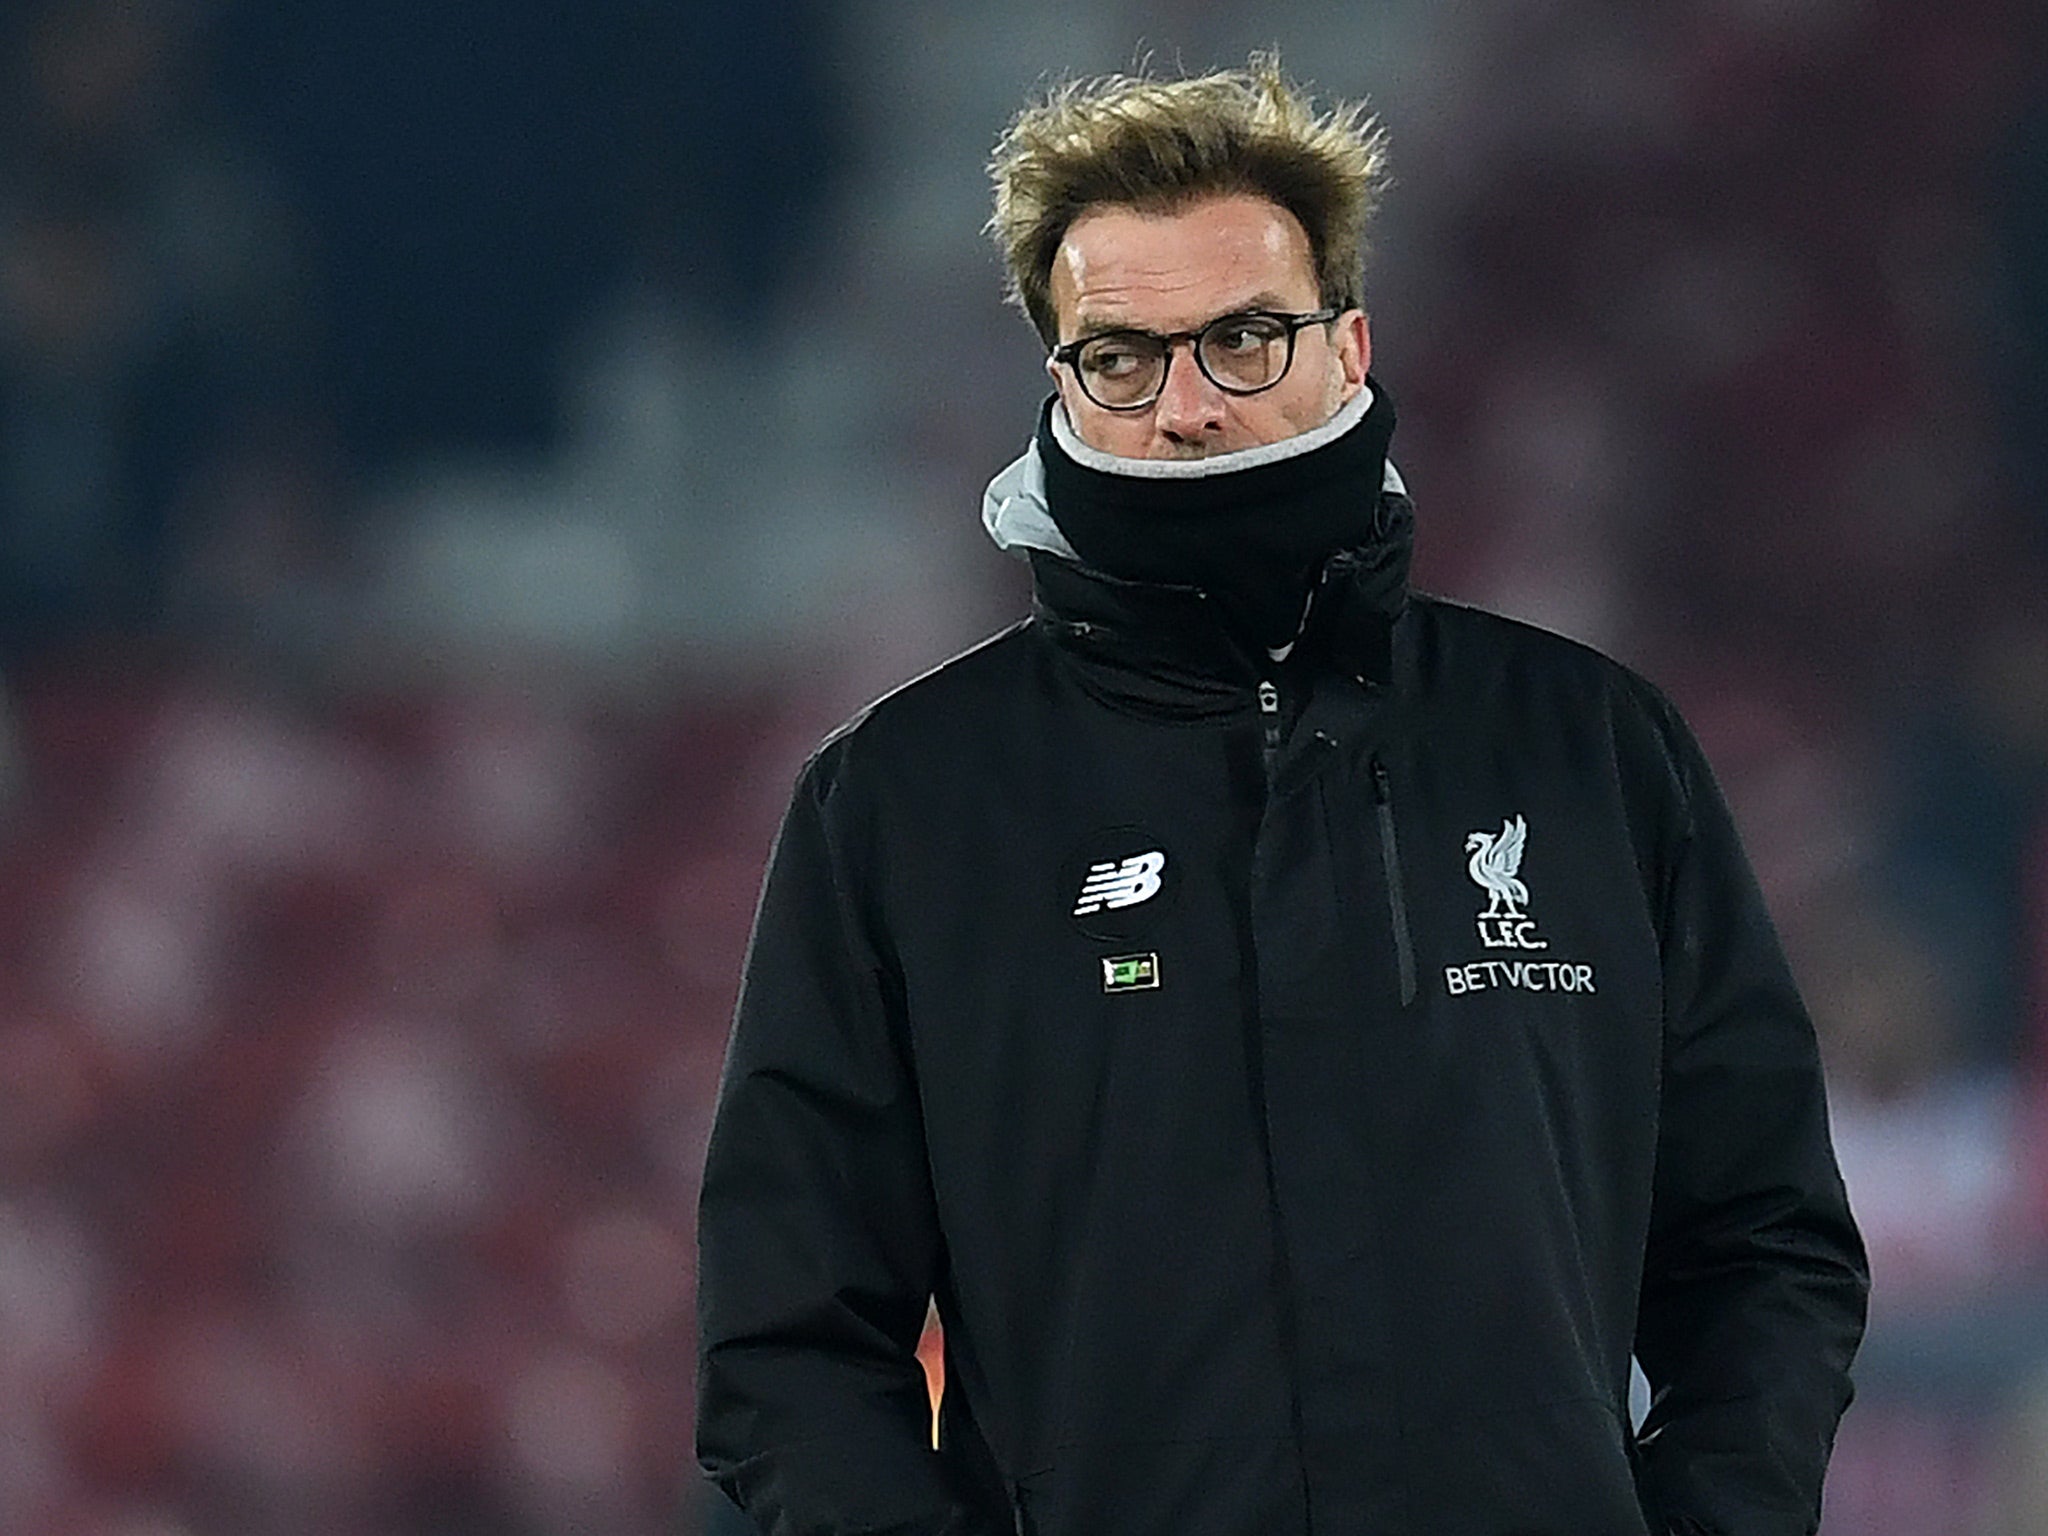 Jurgen Klopp has seen his side only win once since the turn of the year